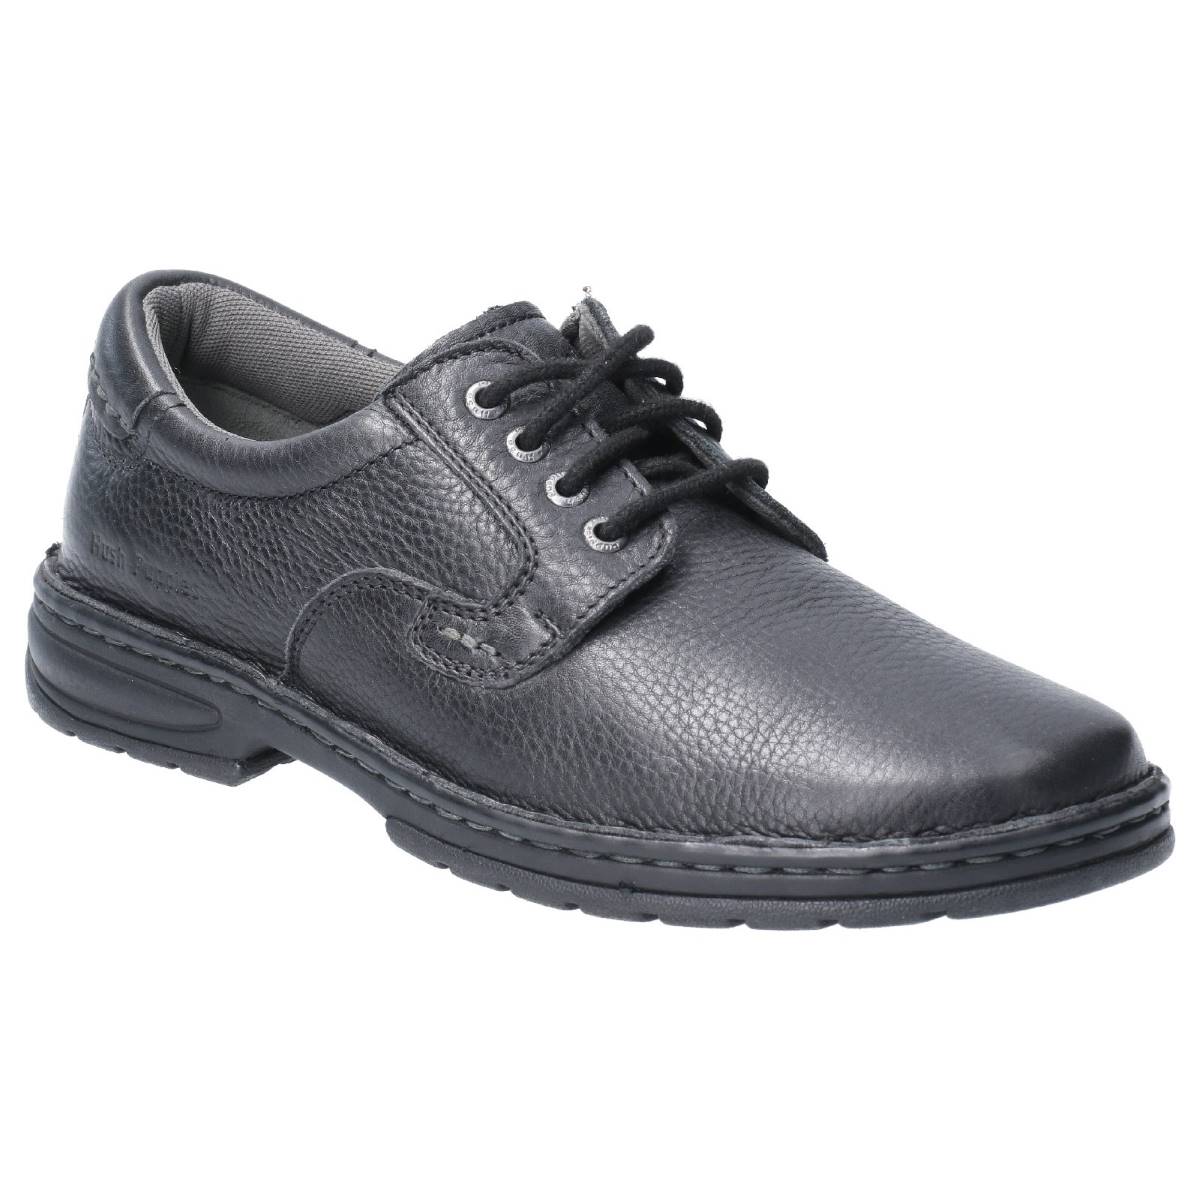 Hush Puppies Outlaw Ii Black Mens comfort shoes HPM2000-61-1 in a Plain Leather in Size 7